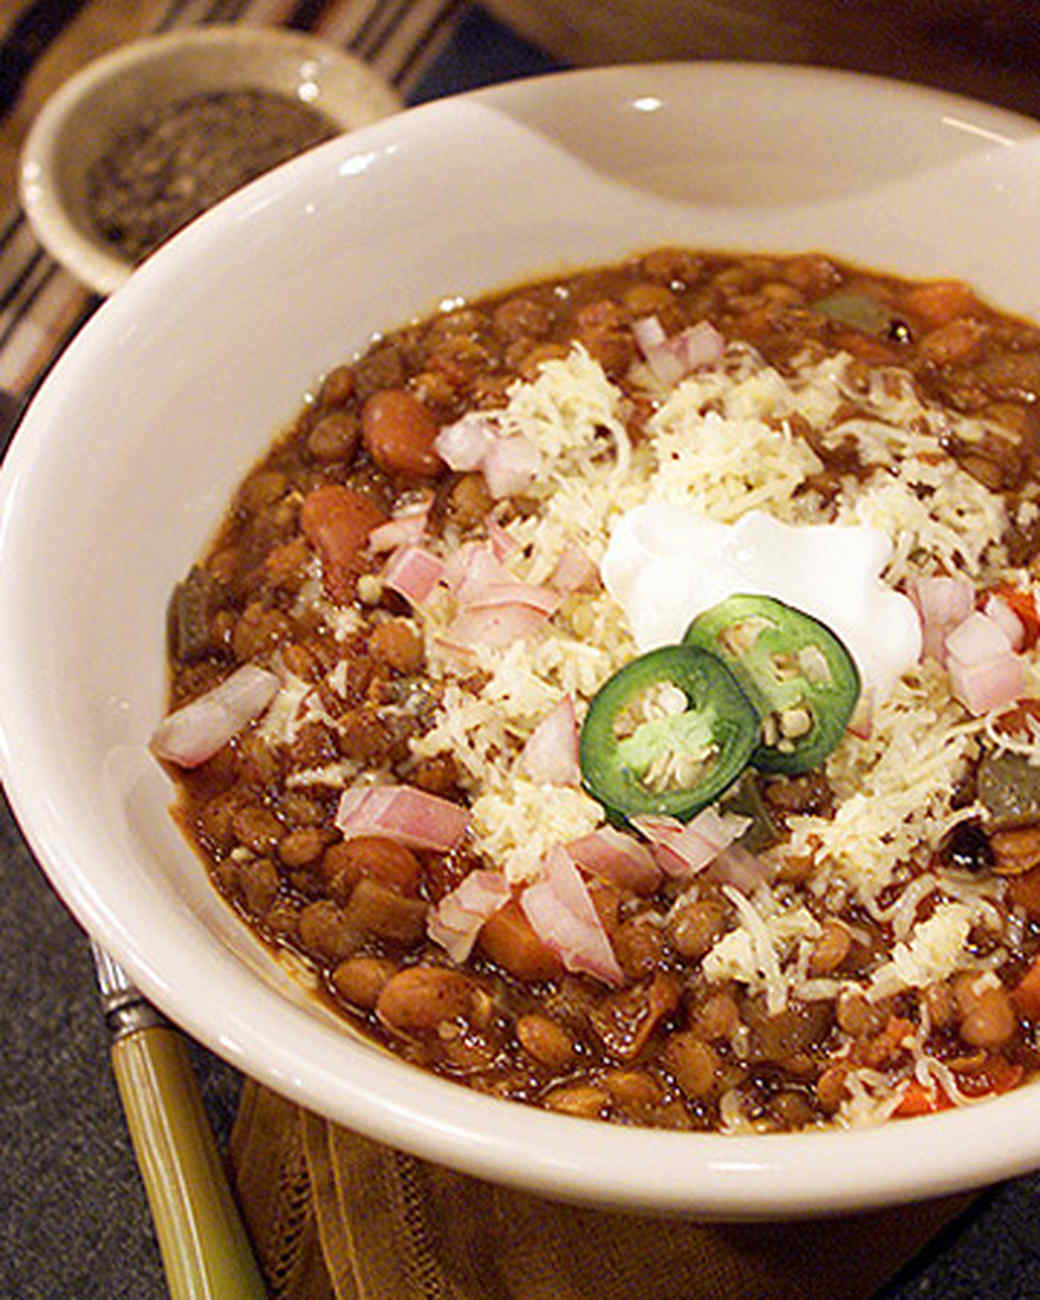 What is in a three-alarm chili kit?